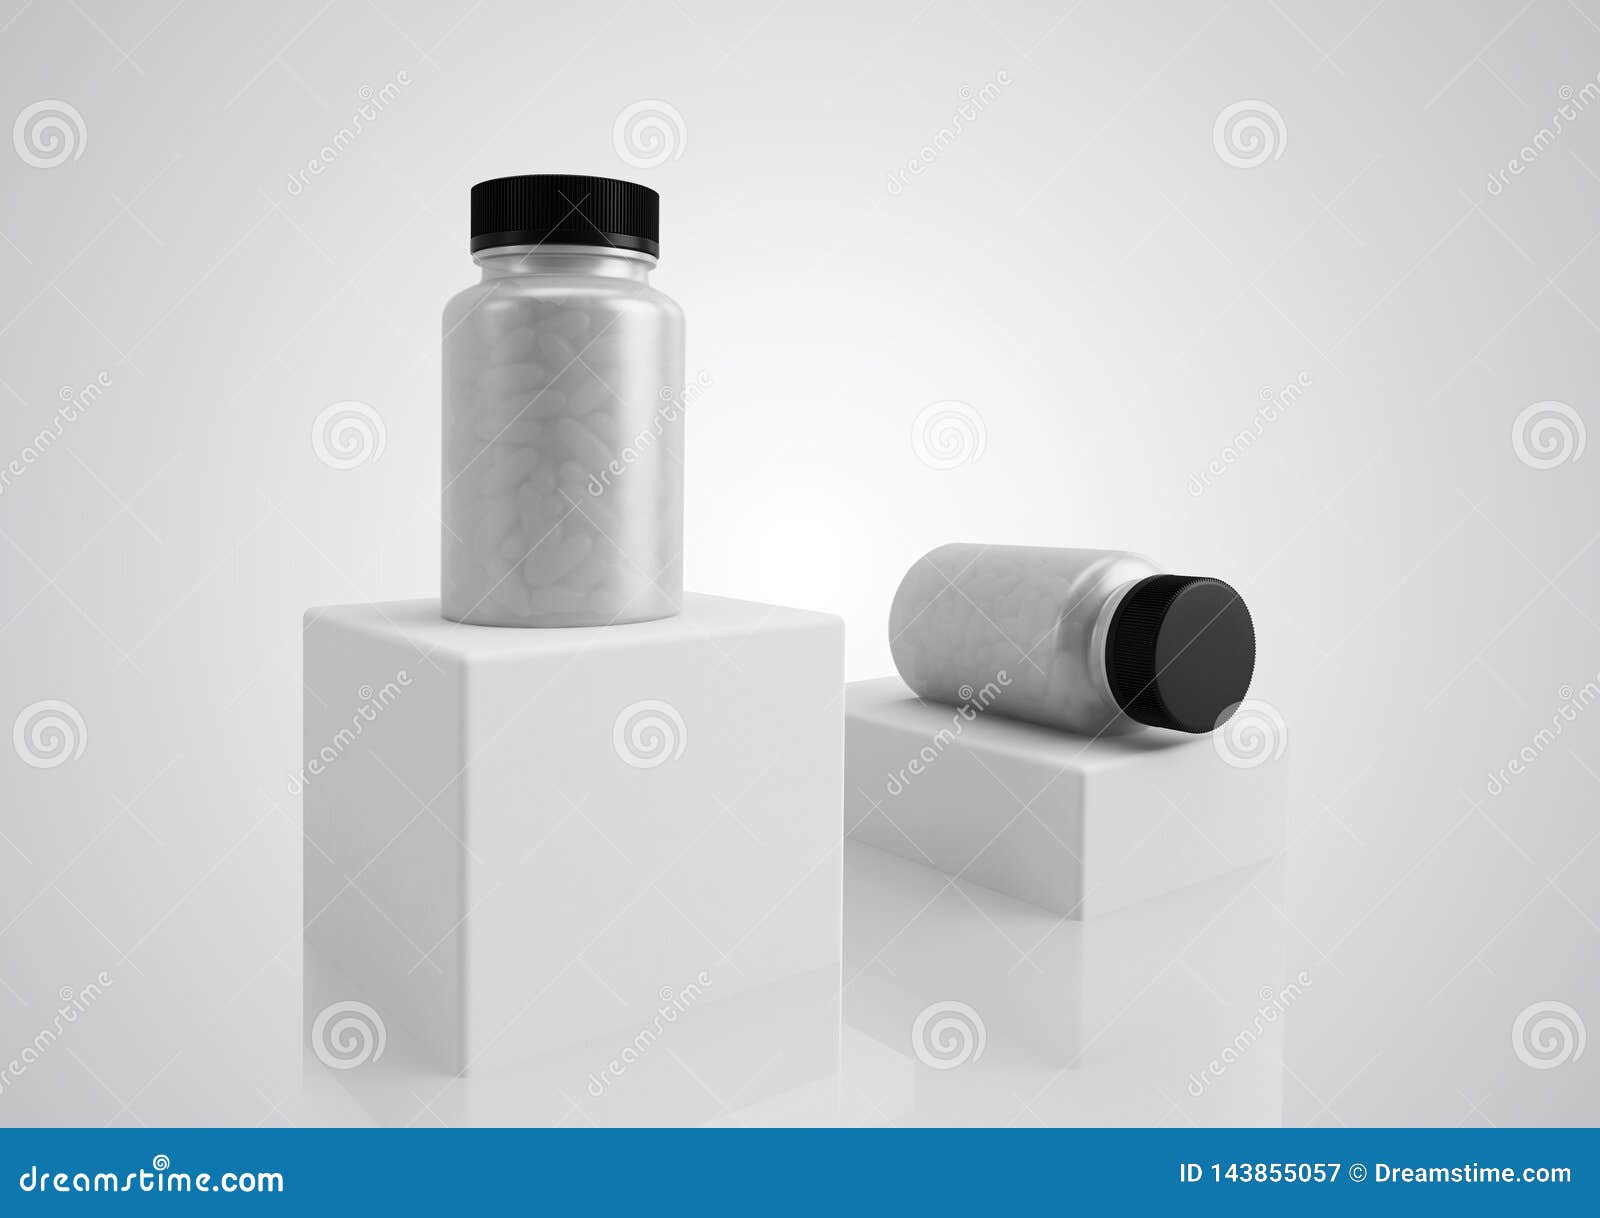 Download Modern Pills Or Supplements Clear White Plastic Bottles Perspective Stock Illustration Illustration Of Pharmacy Package 143855057